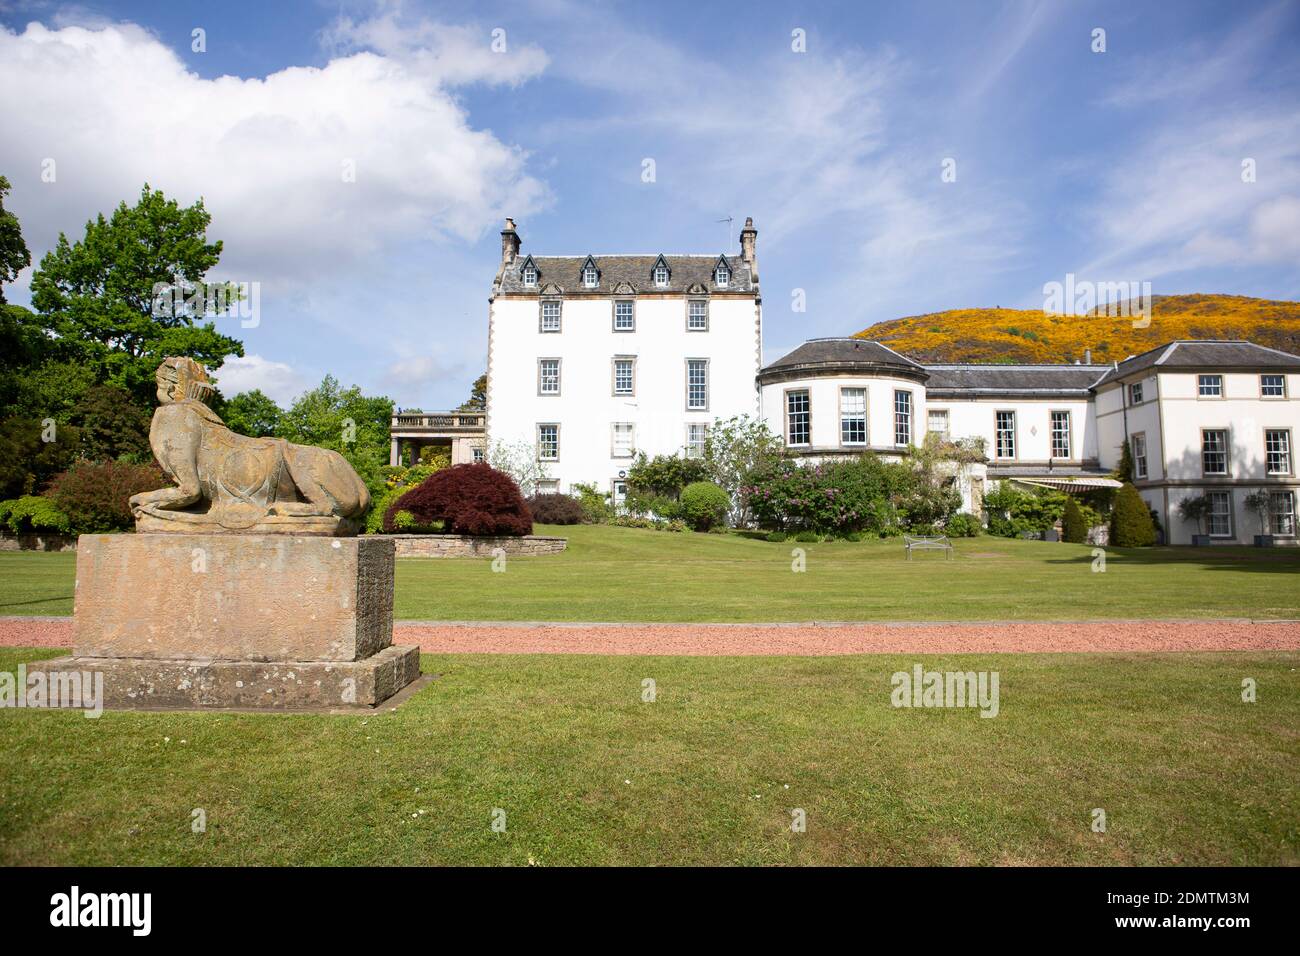 Prestonfield Golf Club High Resolution Stock Photography and Images - Alamy